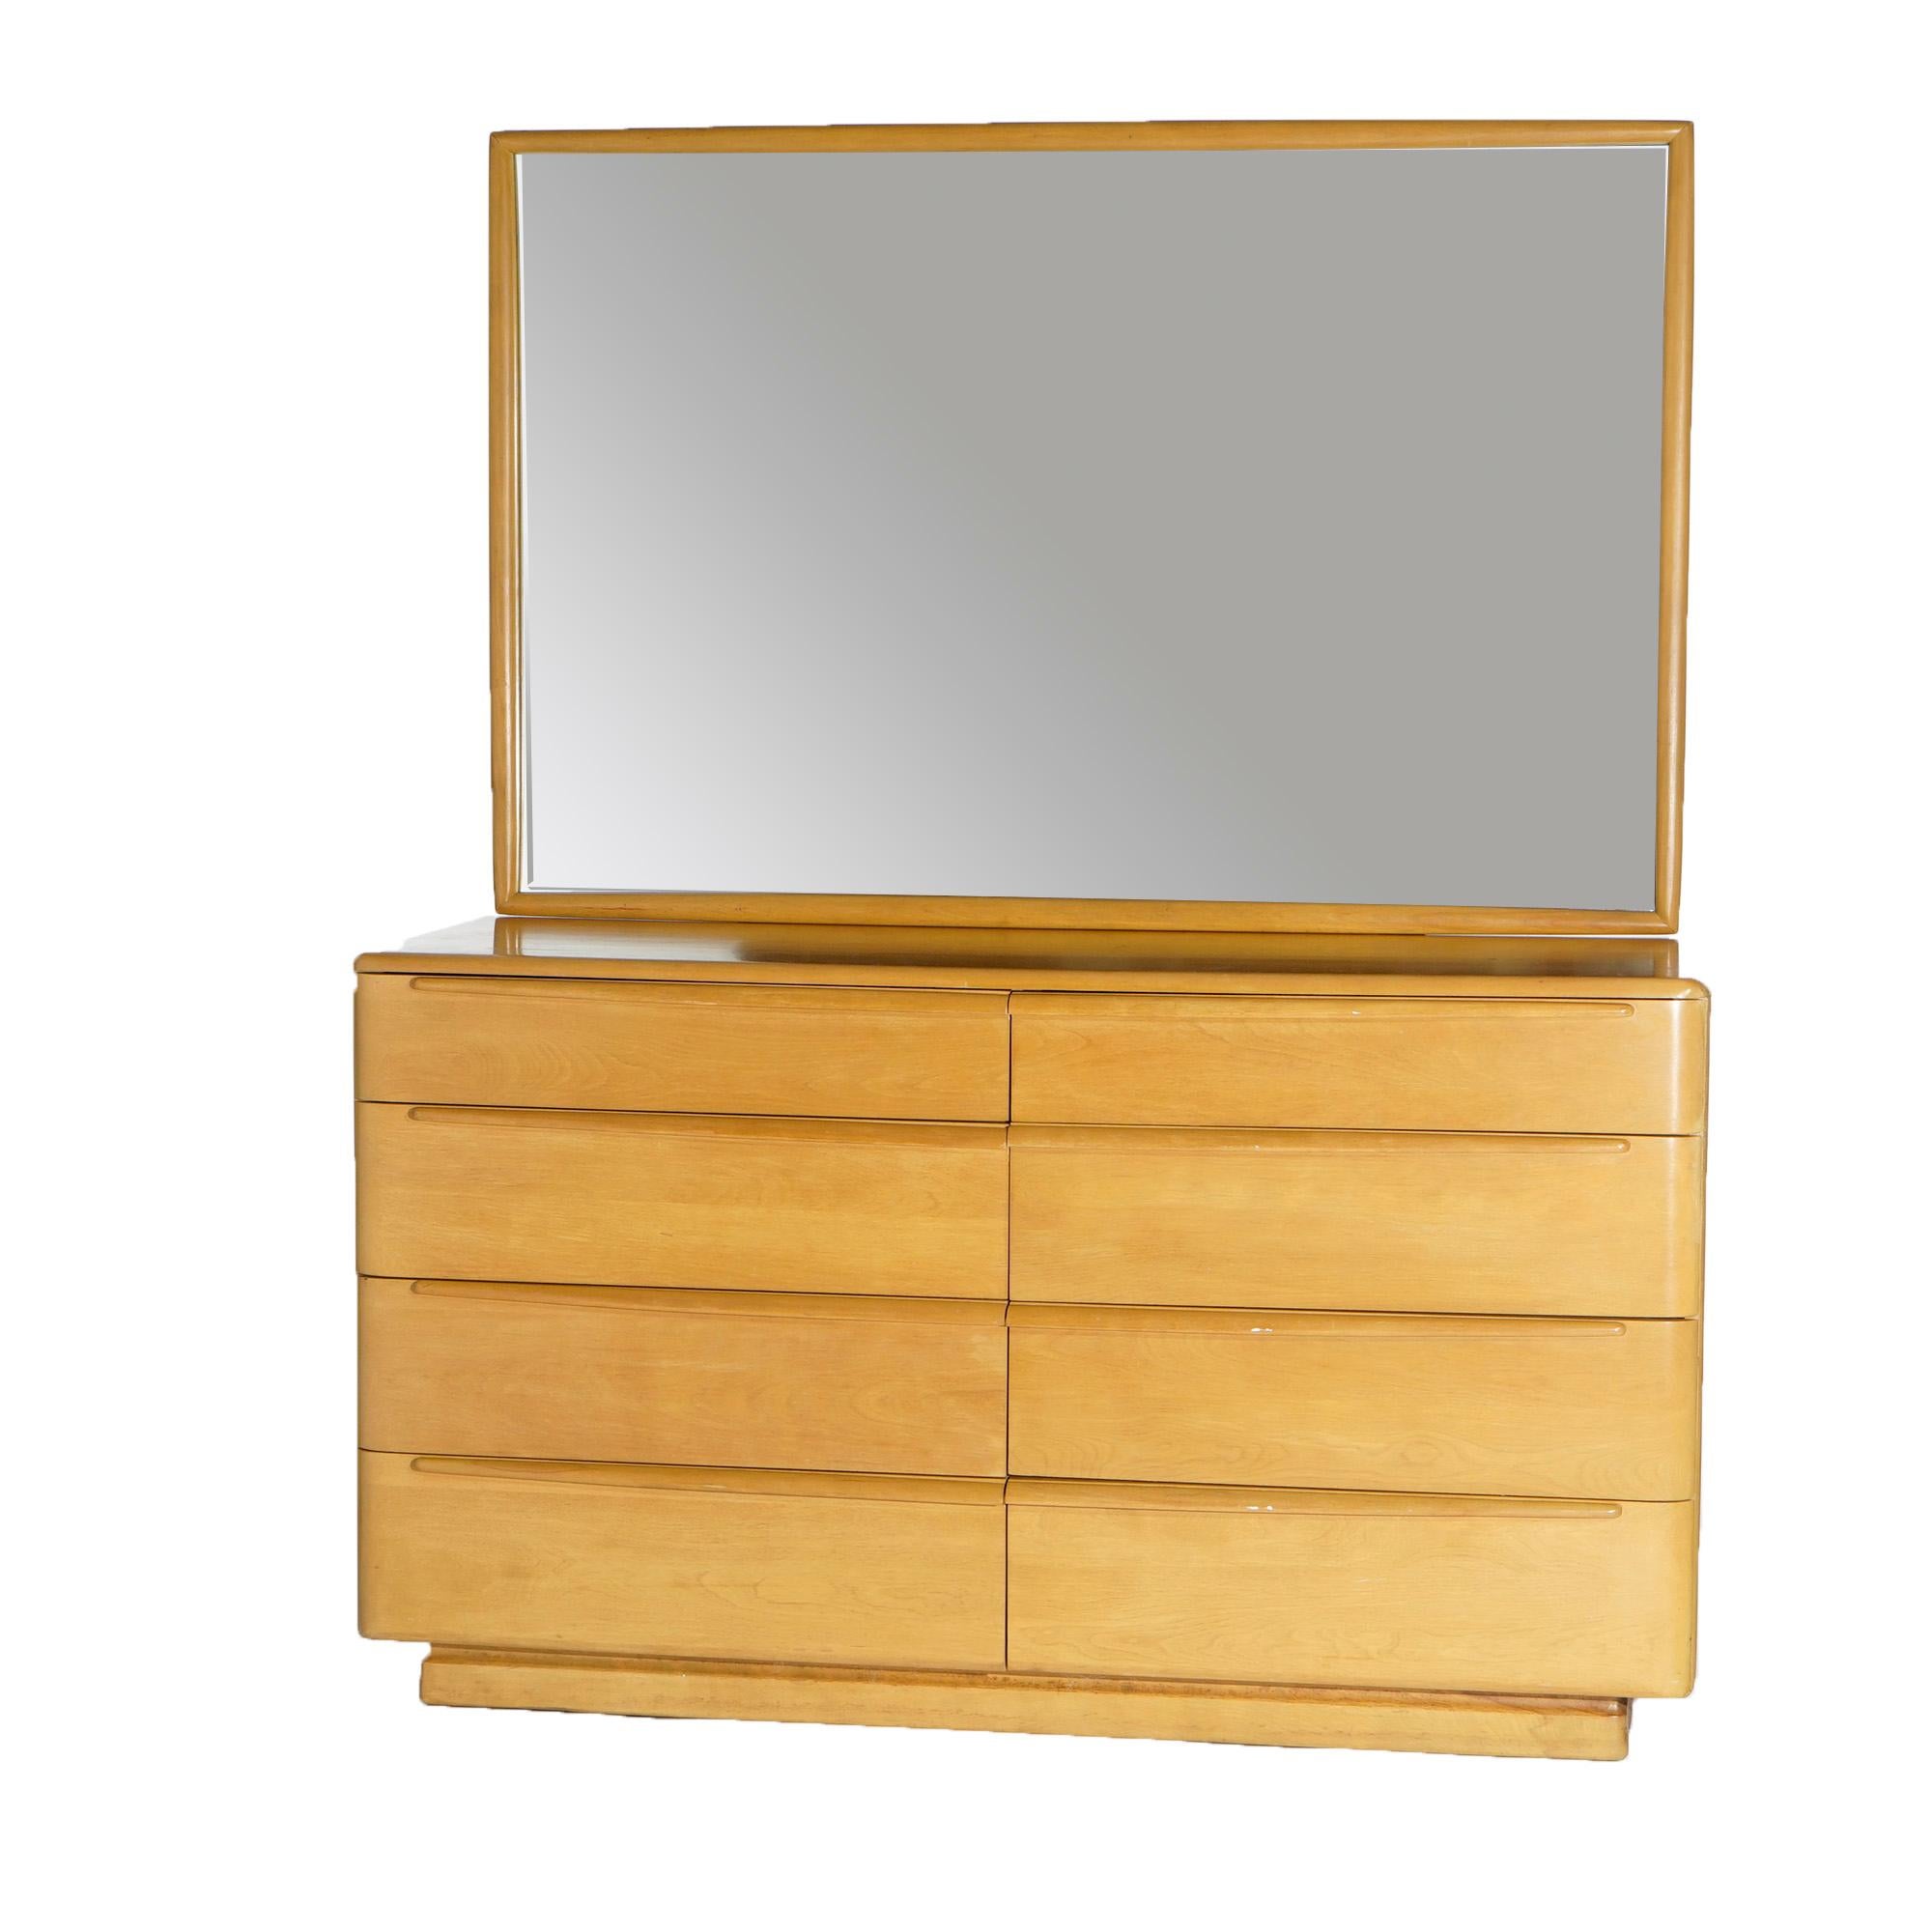 A Mid-Century Modern dresser by Heywood Wakefield offers birch construction with large mirror over eight- drawer chest, wheat finish, maker mark as photographed, c1950.

Measures- 68''H x 56.25''W x 20.5''D.

Catalogue Note: Ask about DISCOUNTED